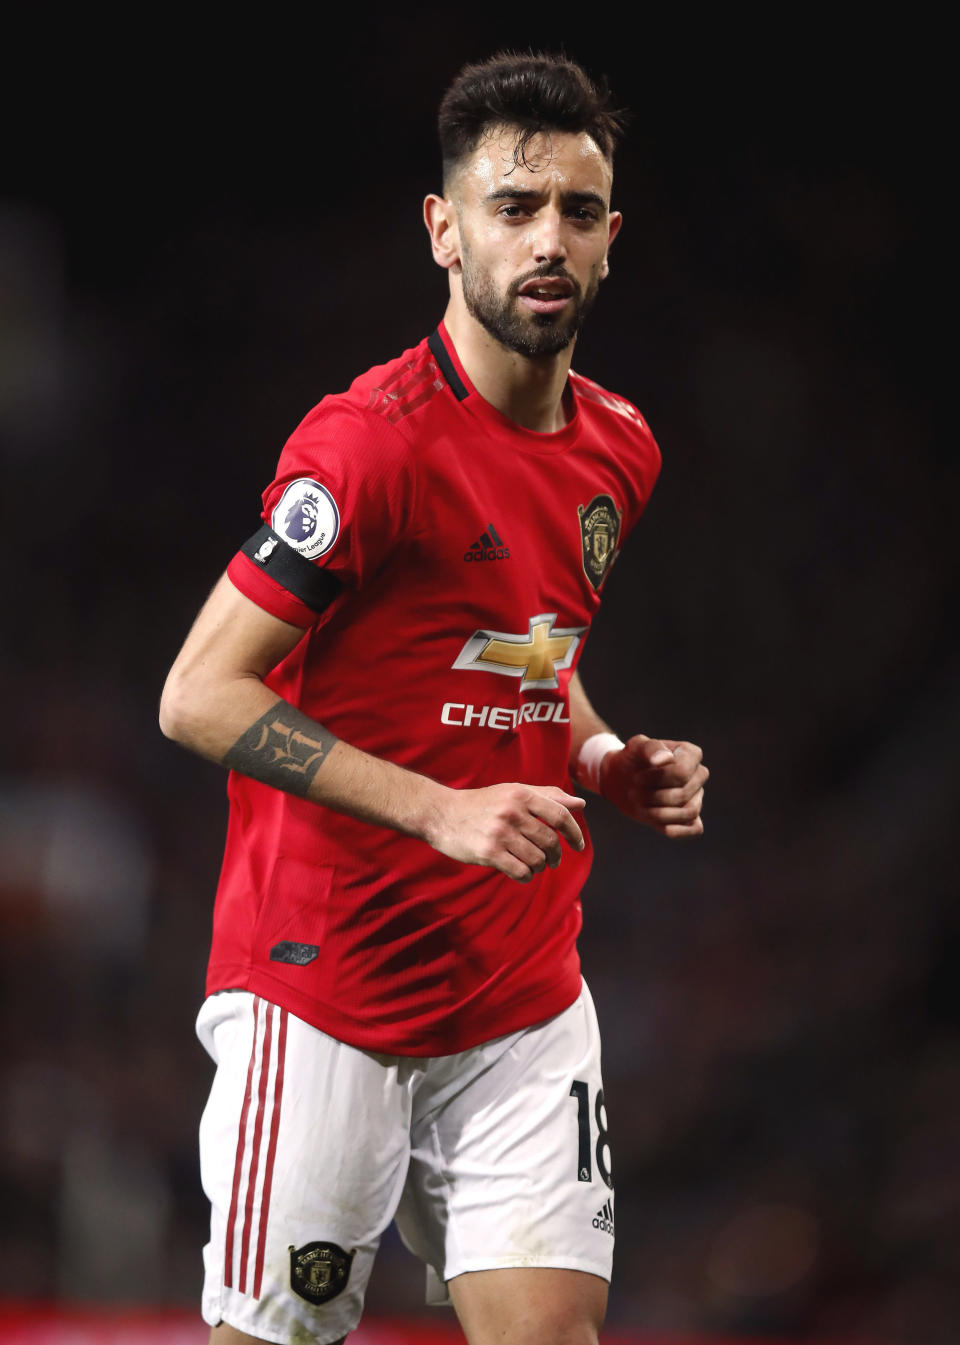 Manchester United's Bruno Fernandes runs, during the English Premier League soccer match between Manchester United and Wolverhampton Wanderers, at Old Trafford, in Manchester, England, Saturday, Feb. 1, 2020. (Martin Rickett/PA via AP)